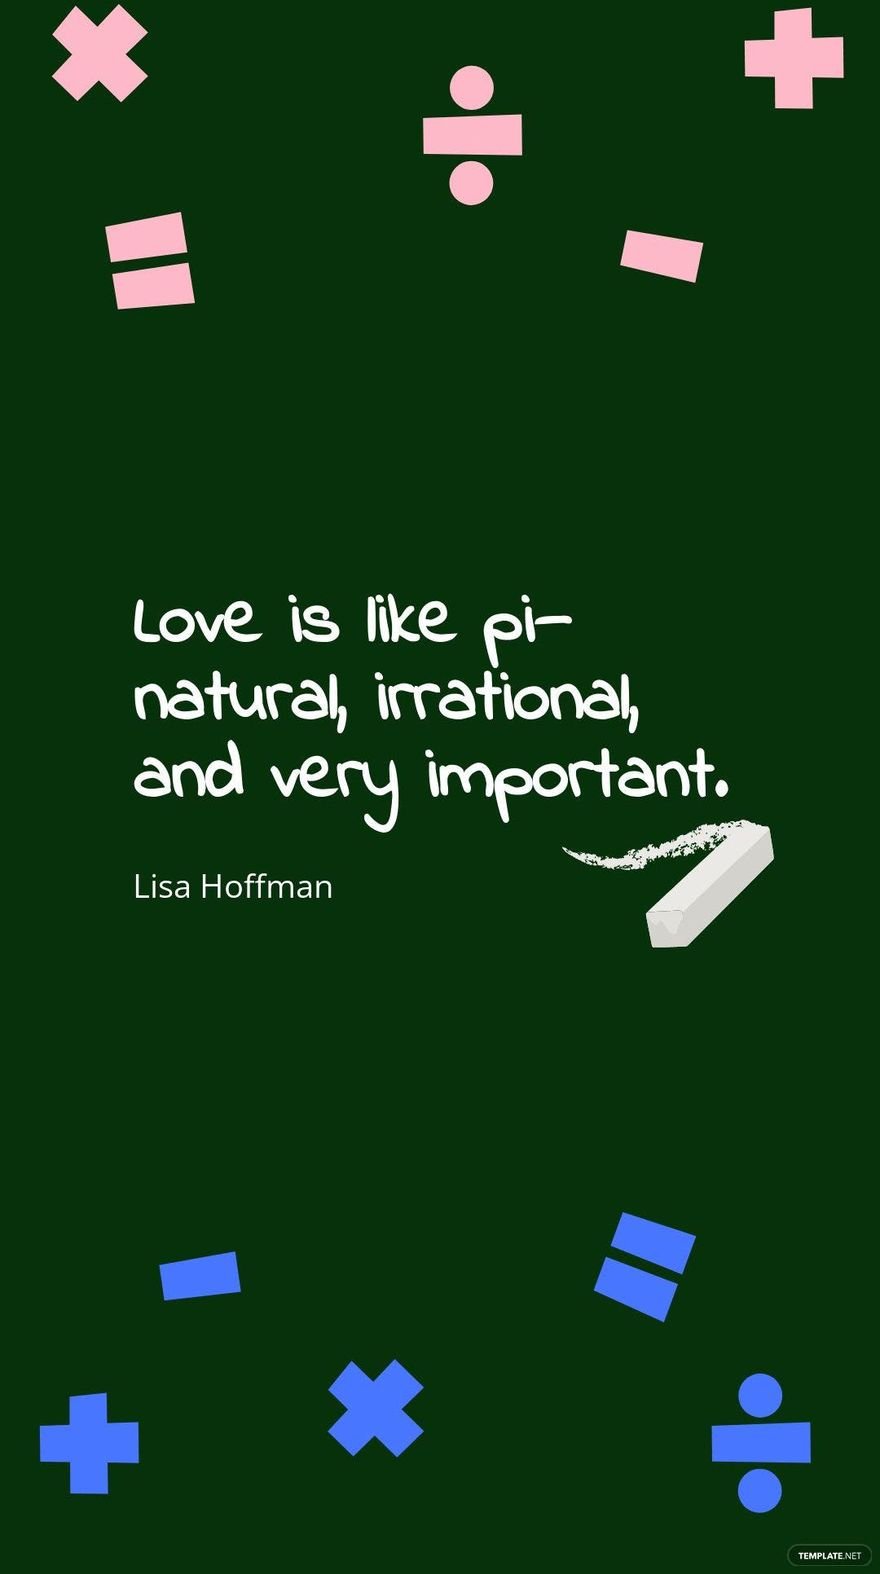 Lisa Hoffman - “Love is like pi – natural, irrational, and very important.”